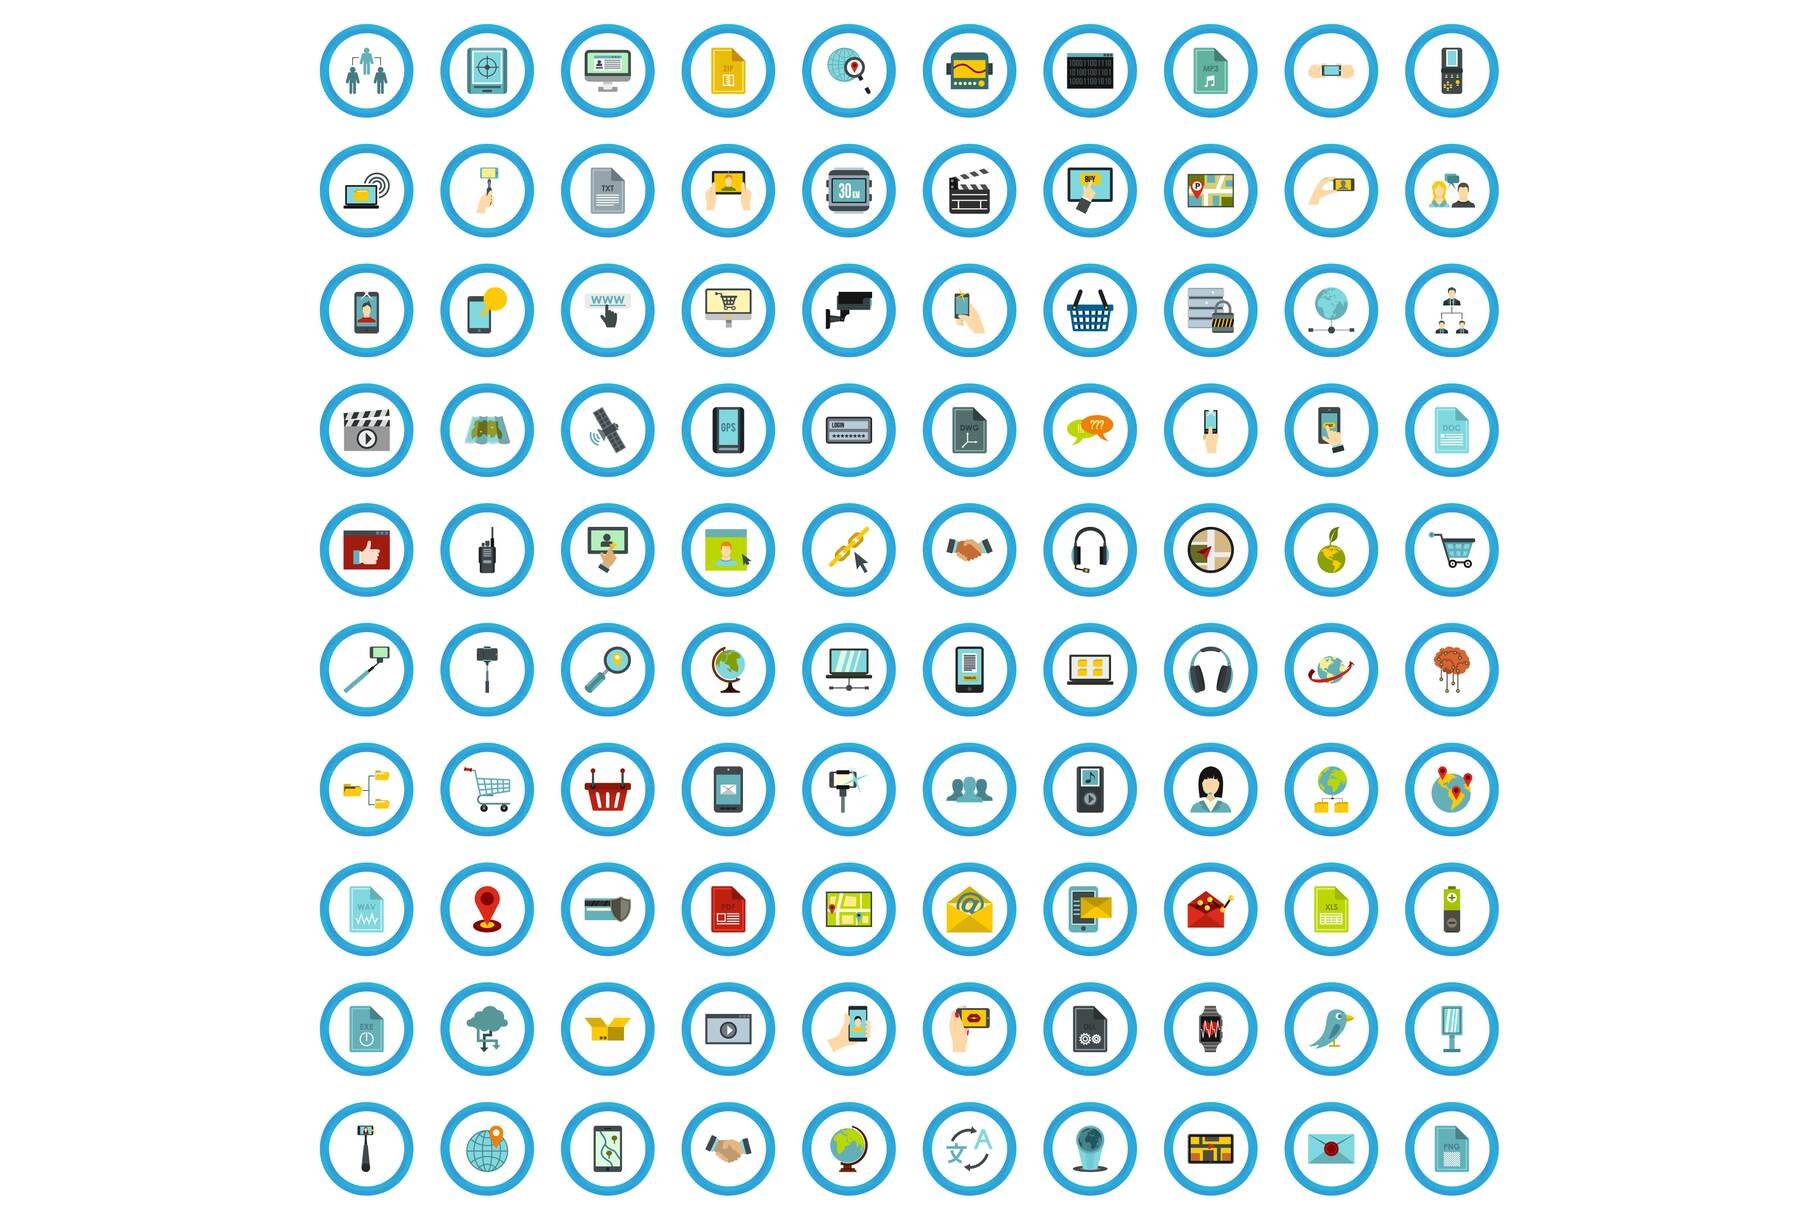 100 gadget shopping icons set cover image.